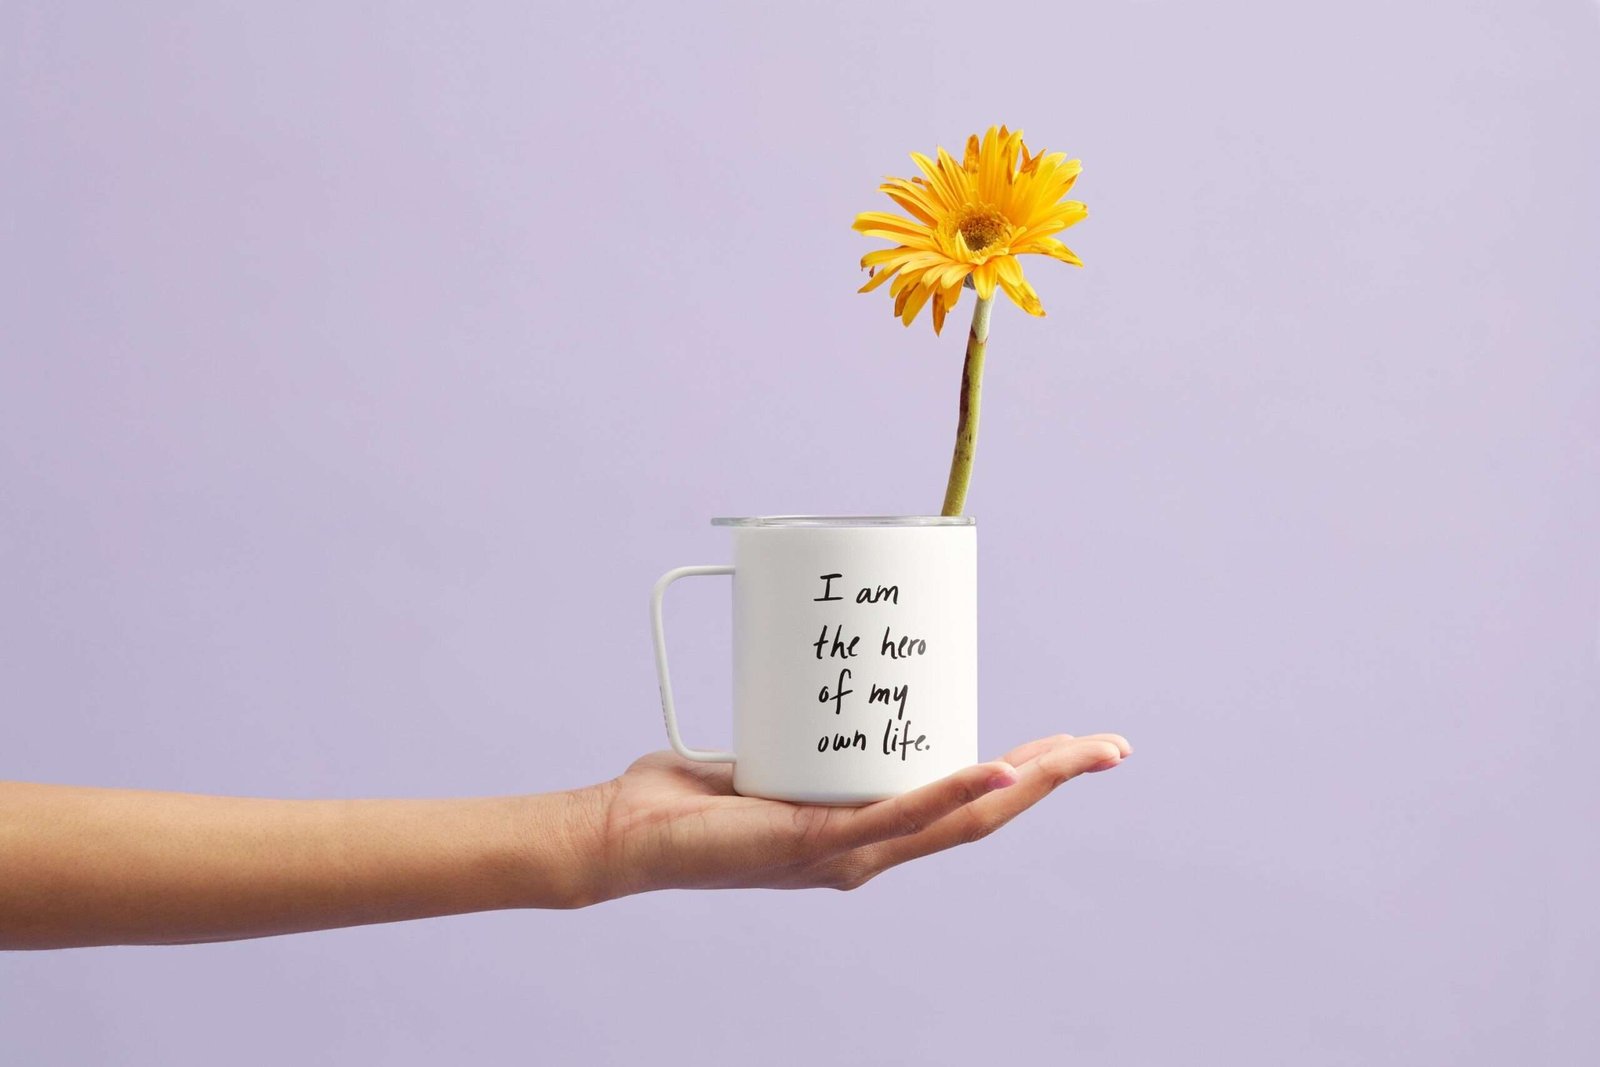 Photo by Thought Catalog: https://www.pexels.com/photo/yellow-petaled-flower-in-white-mug-2228585/